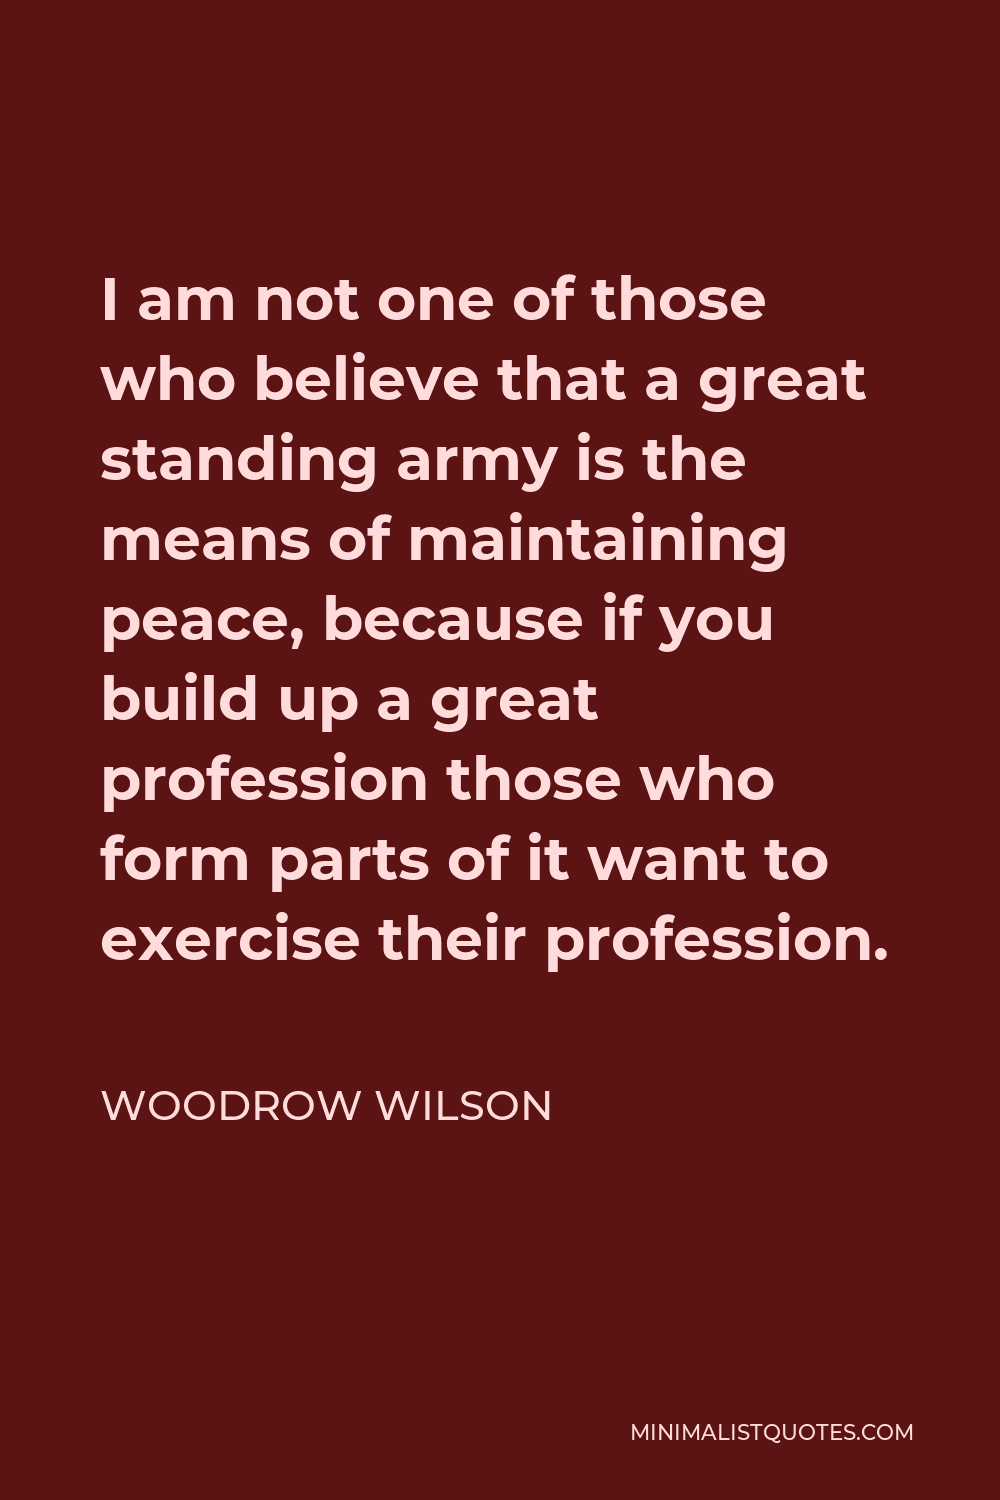 Woodrow Wilson Quote - I am not one of those who believe that a great standing army is the means of maintaining peace, because if you build up a great profession those who form parts of it want to exercise their profession.